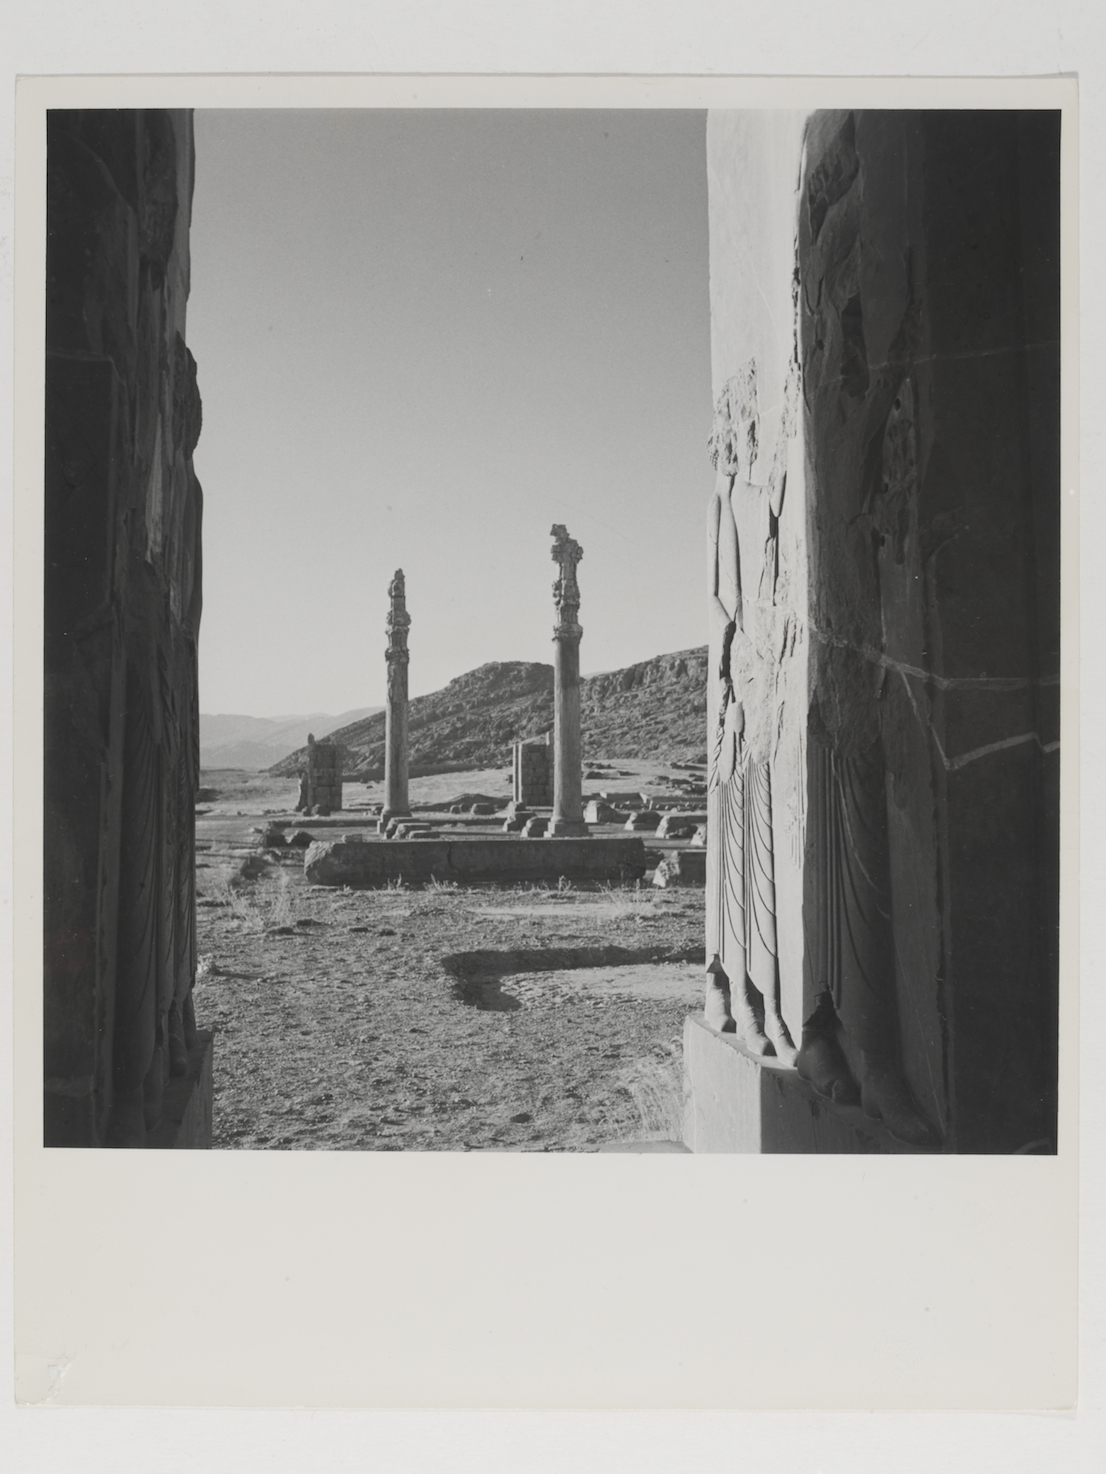 View of ruins at the palace of Persepolis, Persia, 1949. © Condé Nast / Horst Estate.